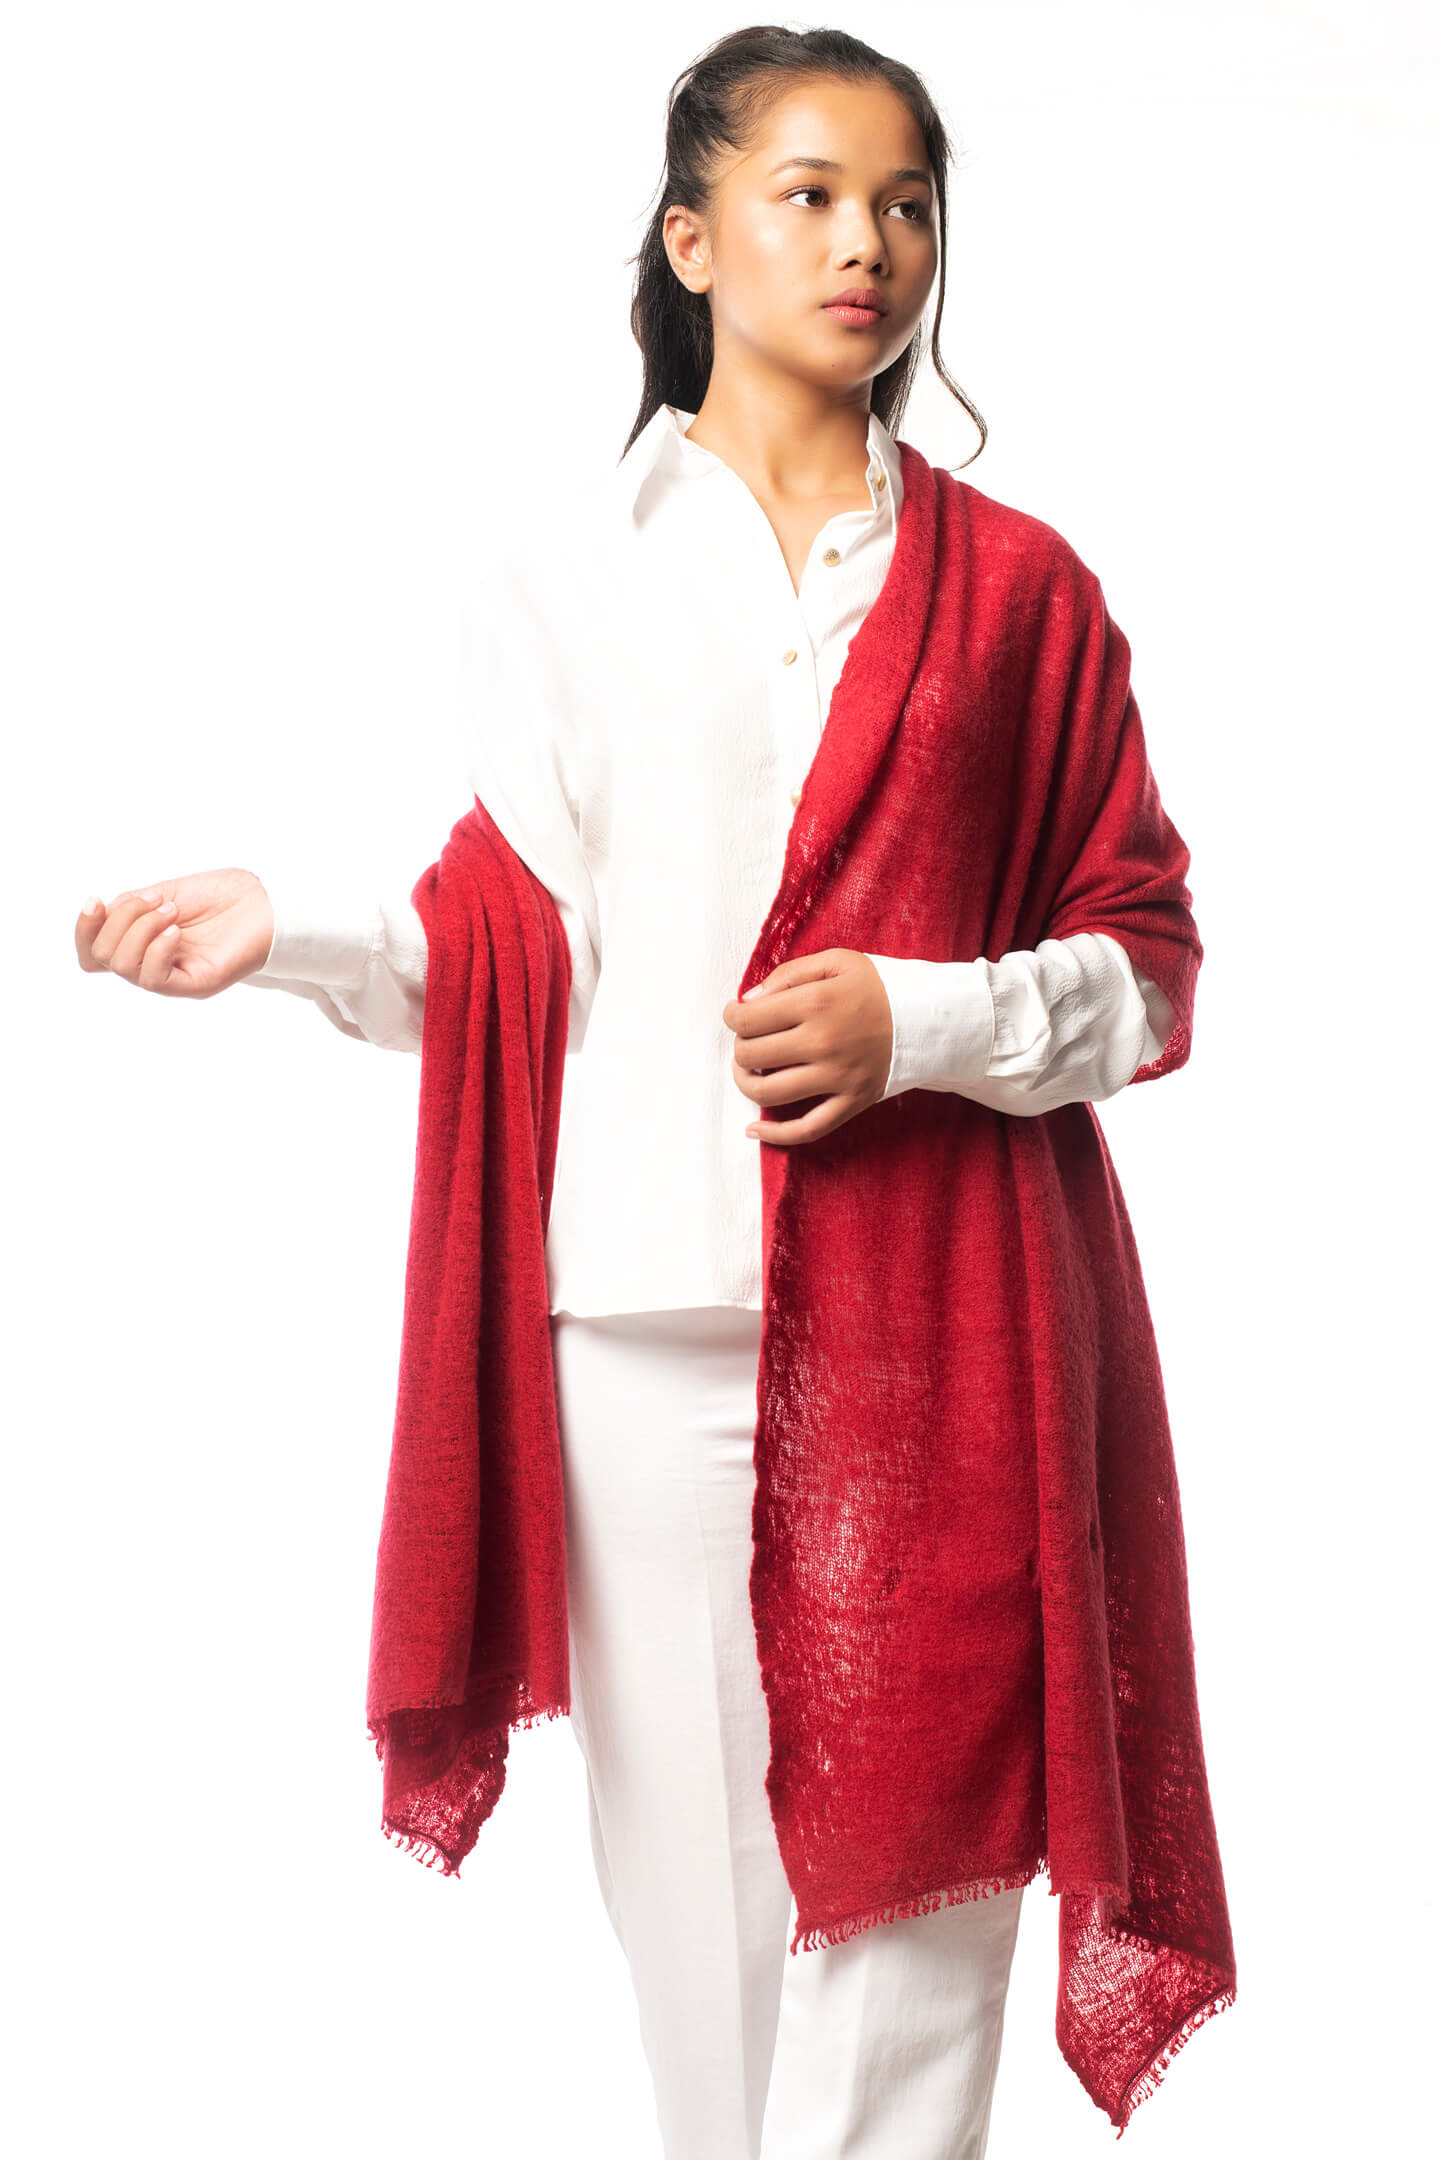 Royal Red Cashmere Scarf Hand Knitted From Pure Cashmere Symbolizes Happiness & Good Fortune. 